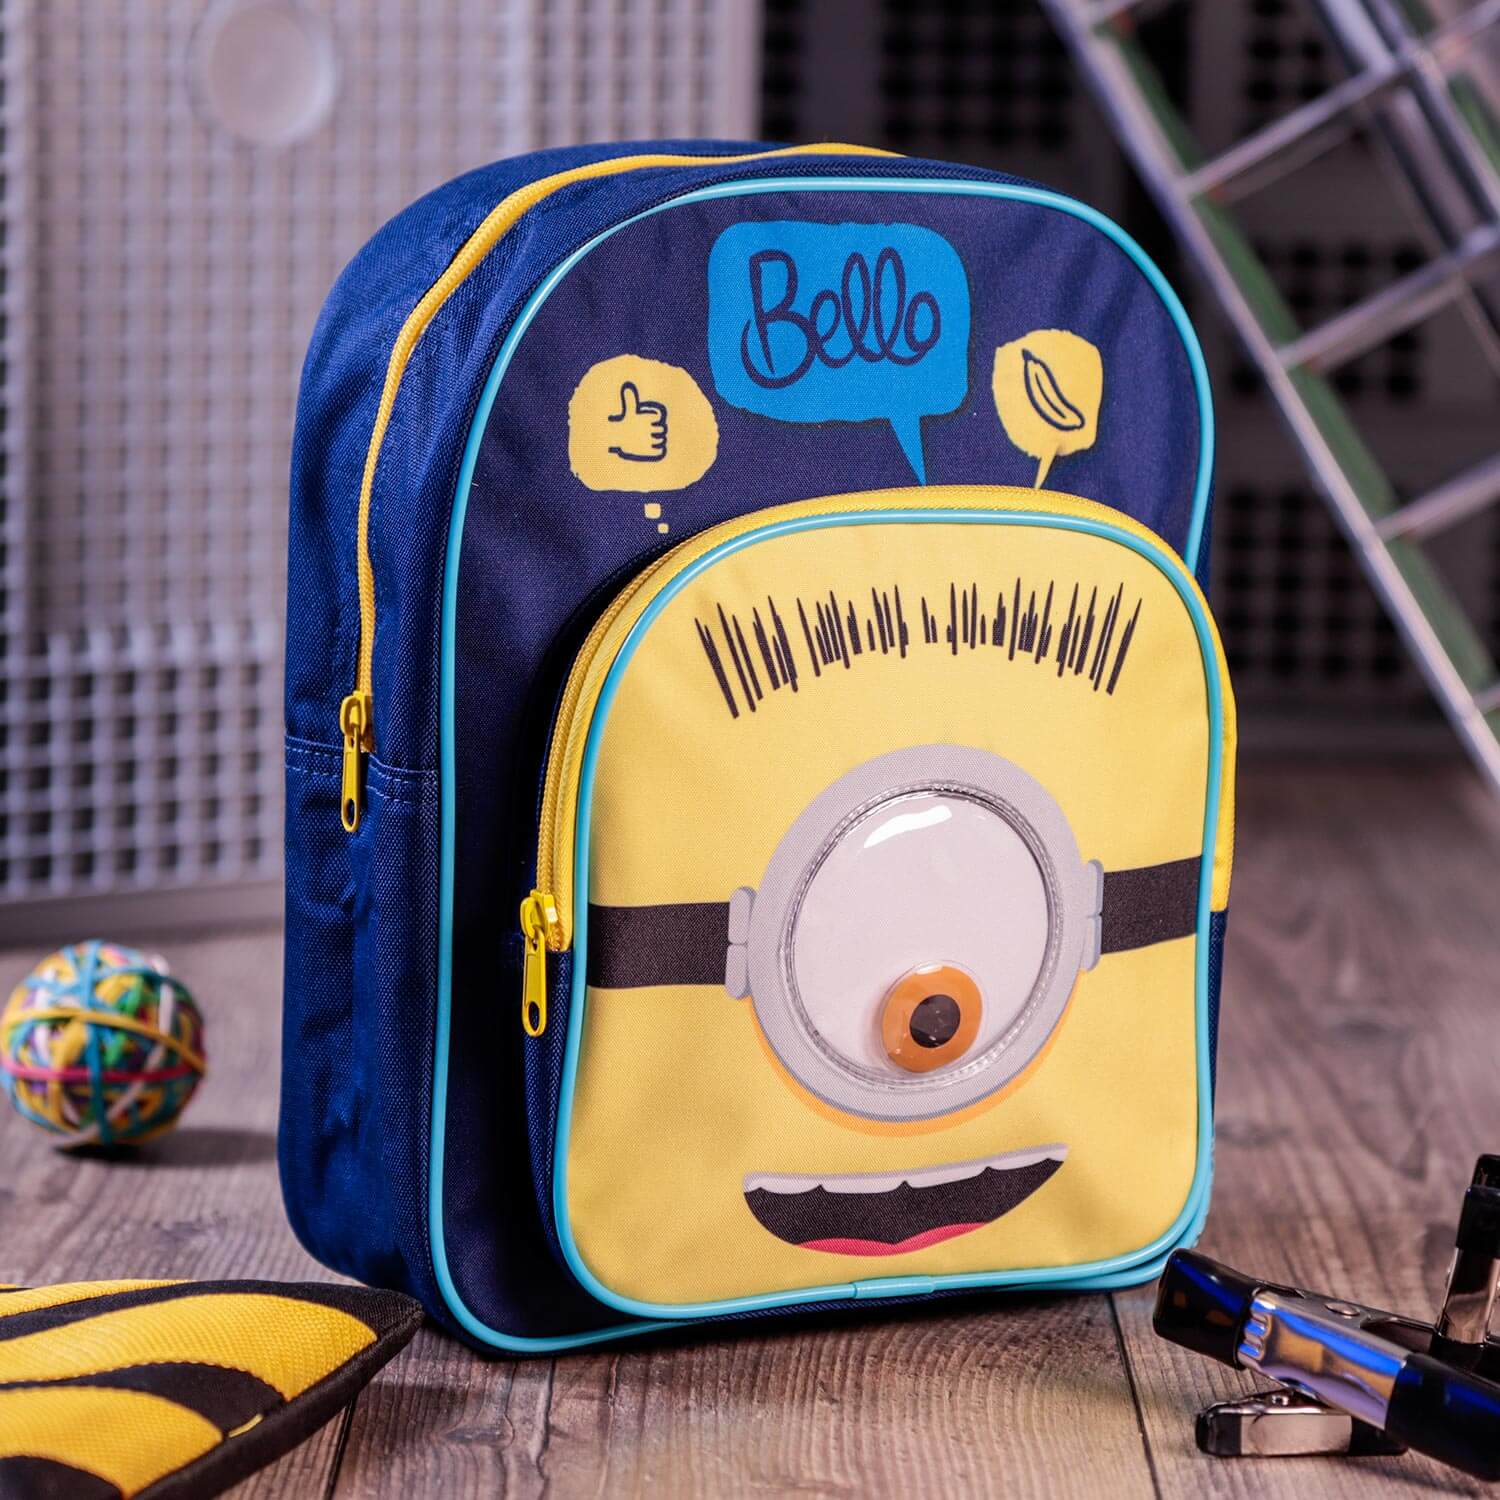 Children's Minions Face Arch Backpack